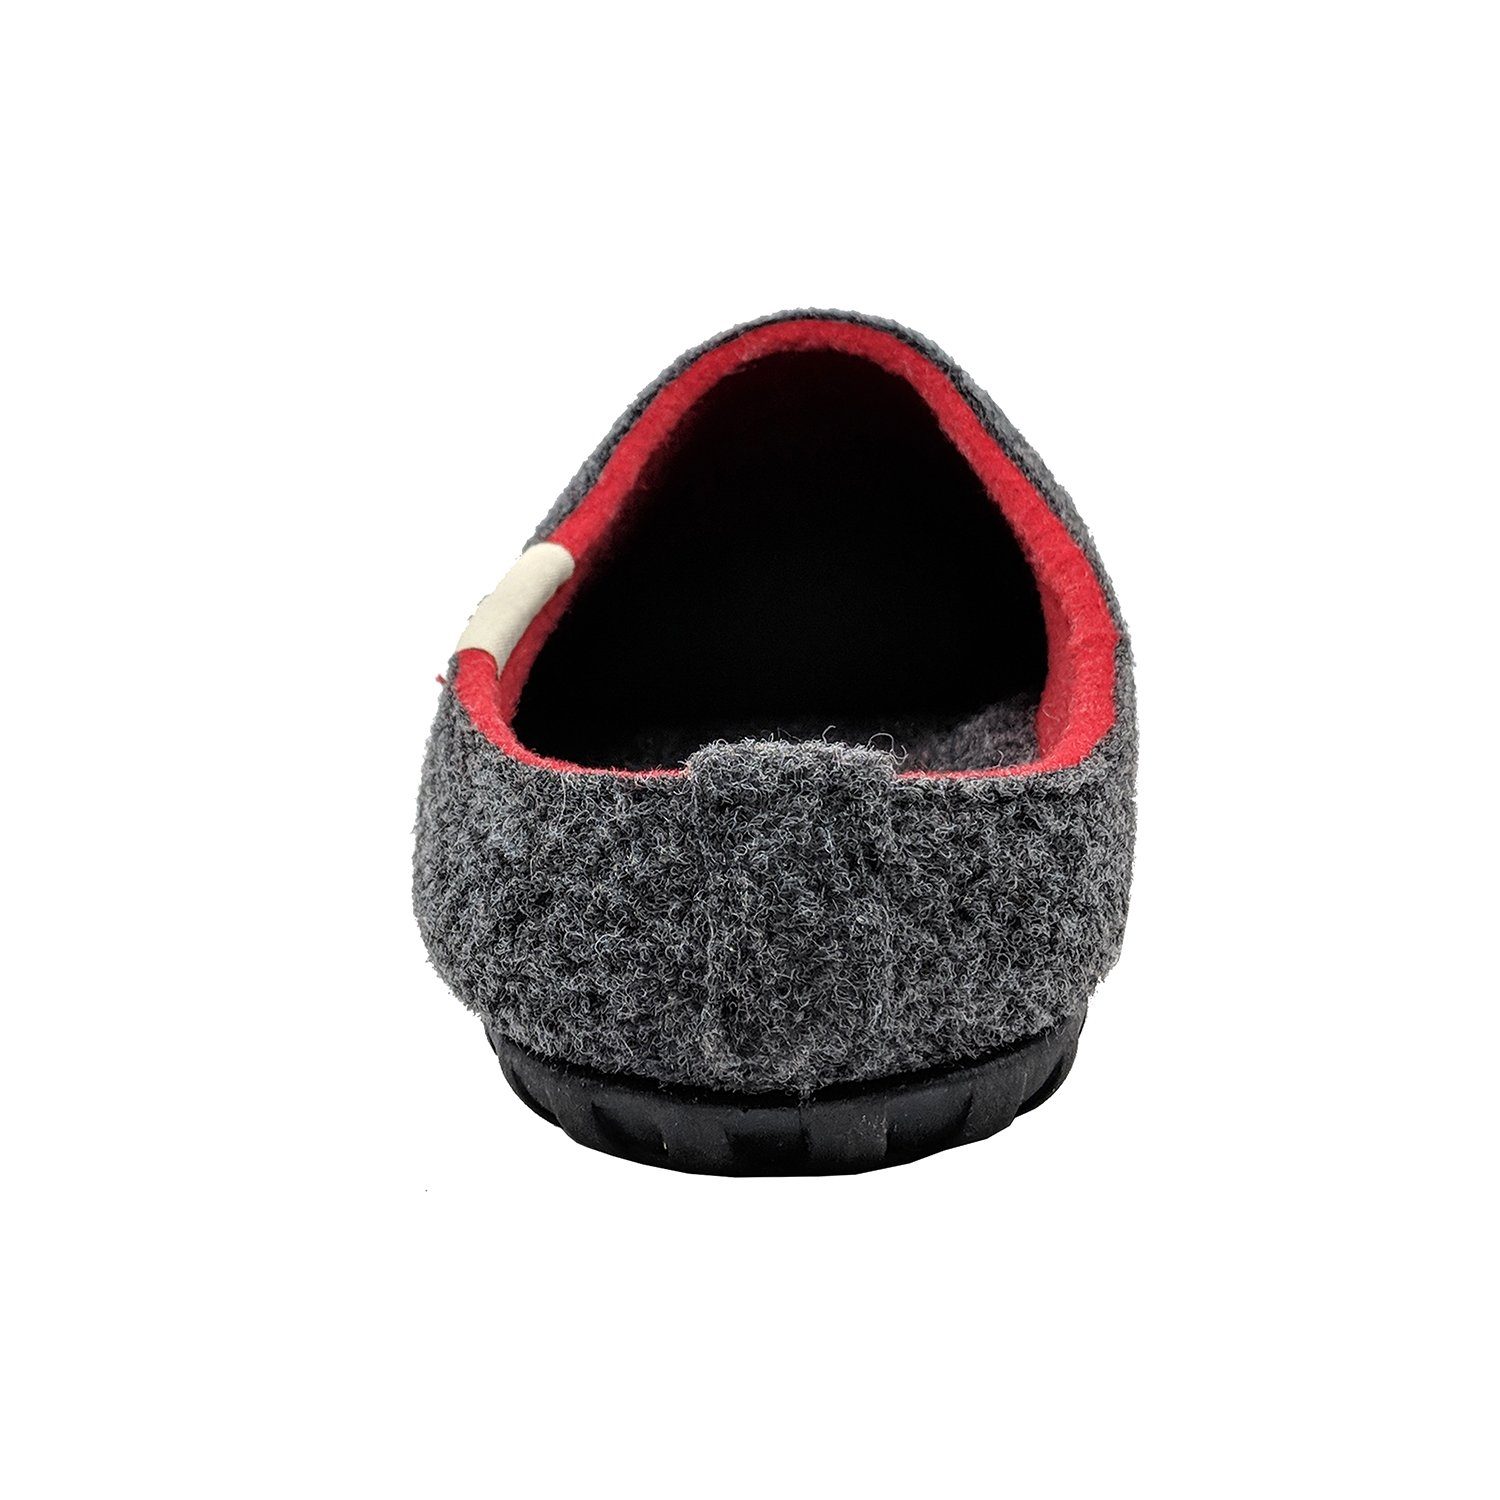 »in Charcoal Outback recycelten Designs« farbenfrohen Slipper Materialien in Gumbies charcoal-Red Hausschuh Red aus